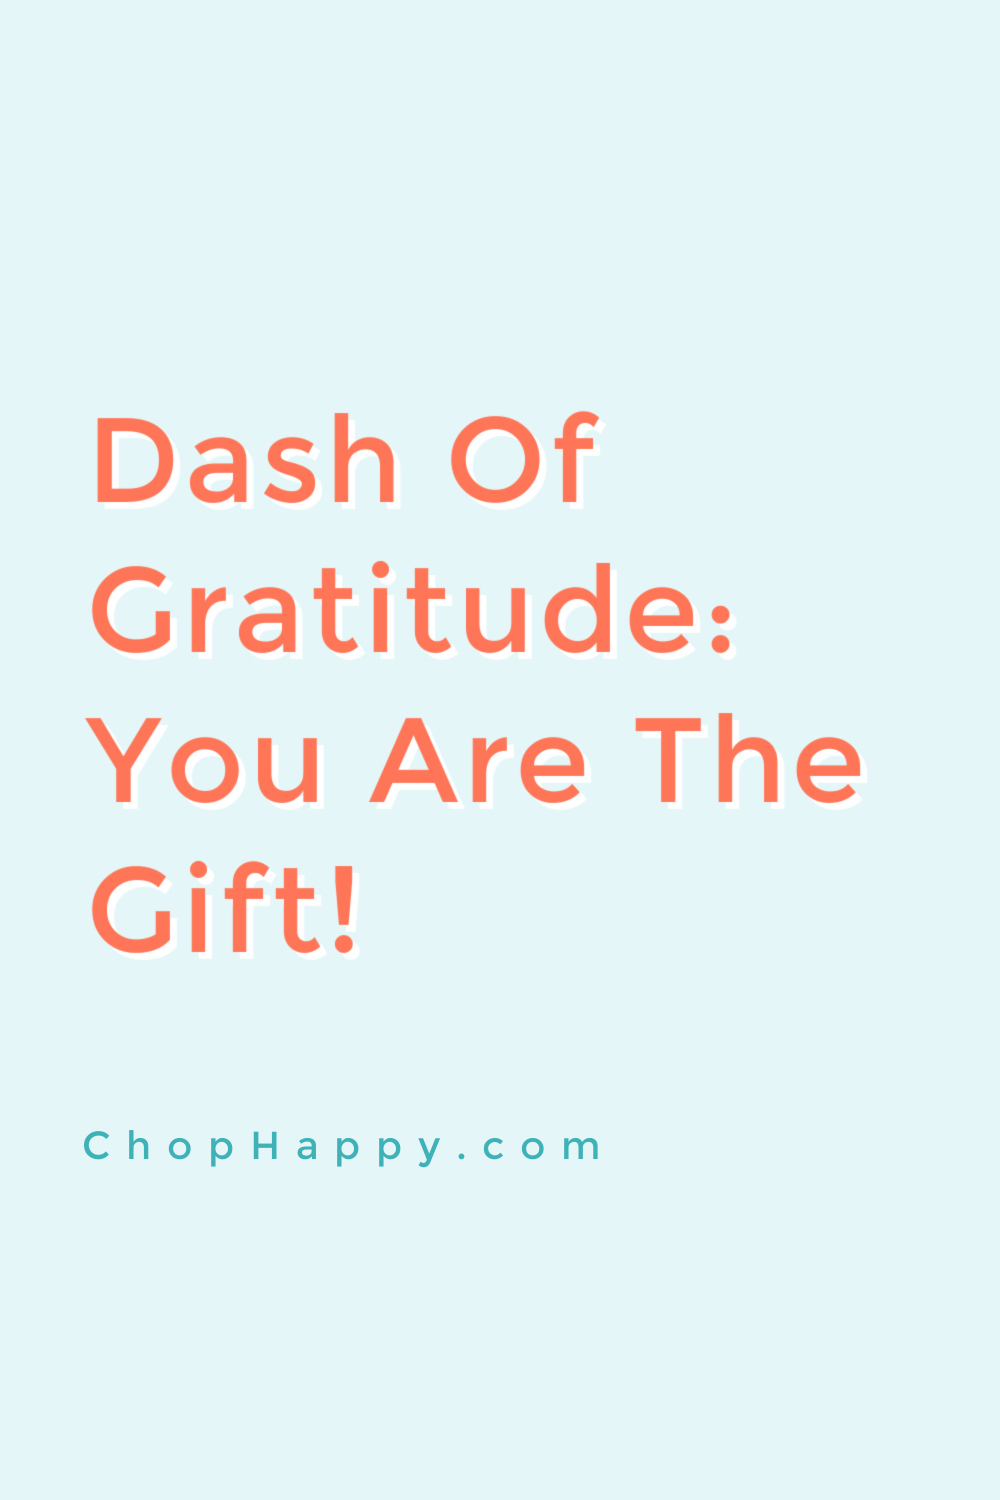 Dash of Gratitude: You Are The Gift. Use the law of attraction to give you an attitude of gratitude. Dream big knowing you are a gift and radiate positive vibes. www.ChopHappy.com #attitiudeofgratitude #gift